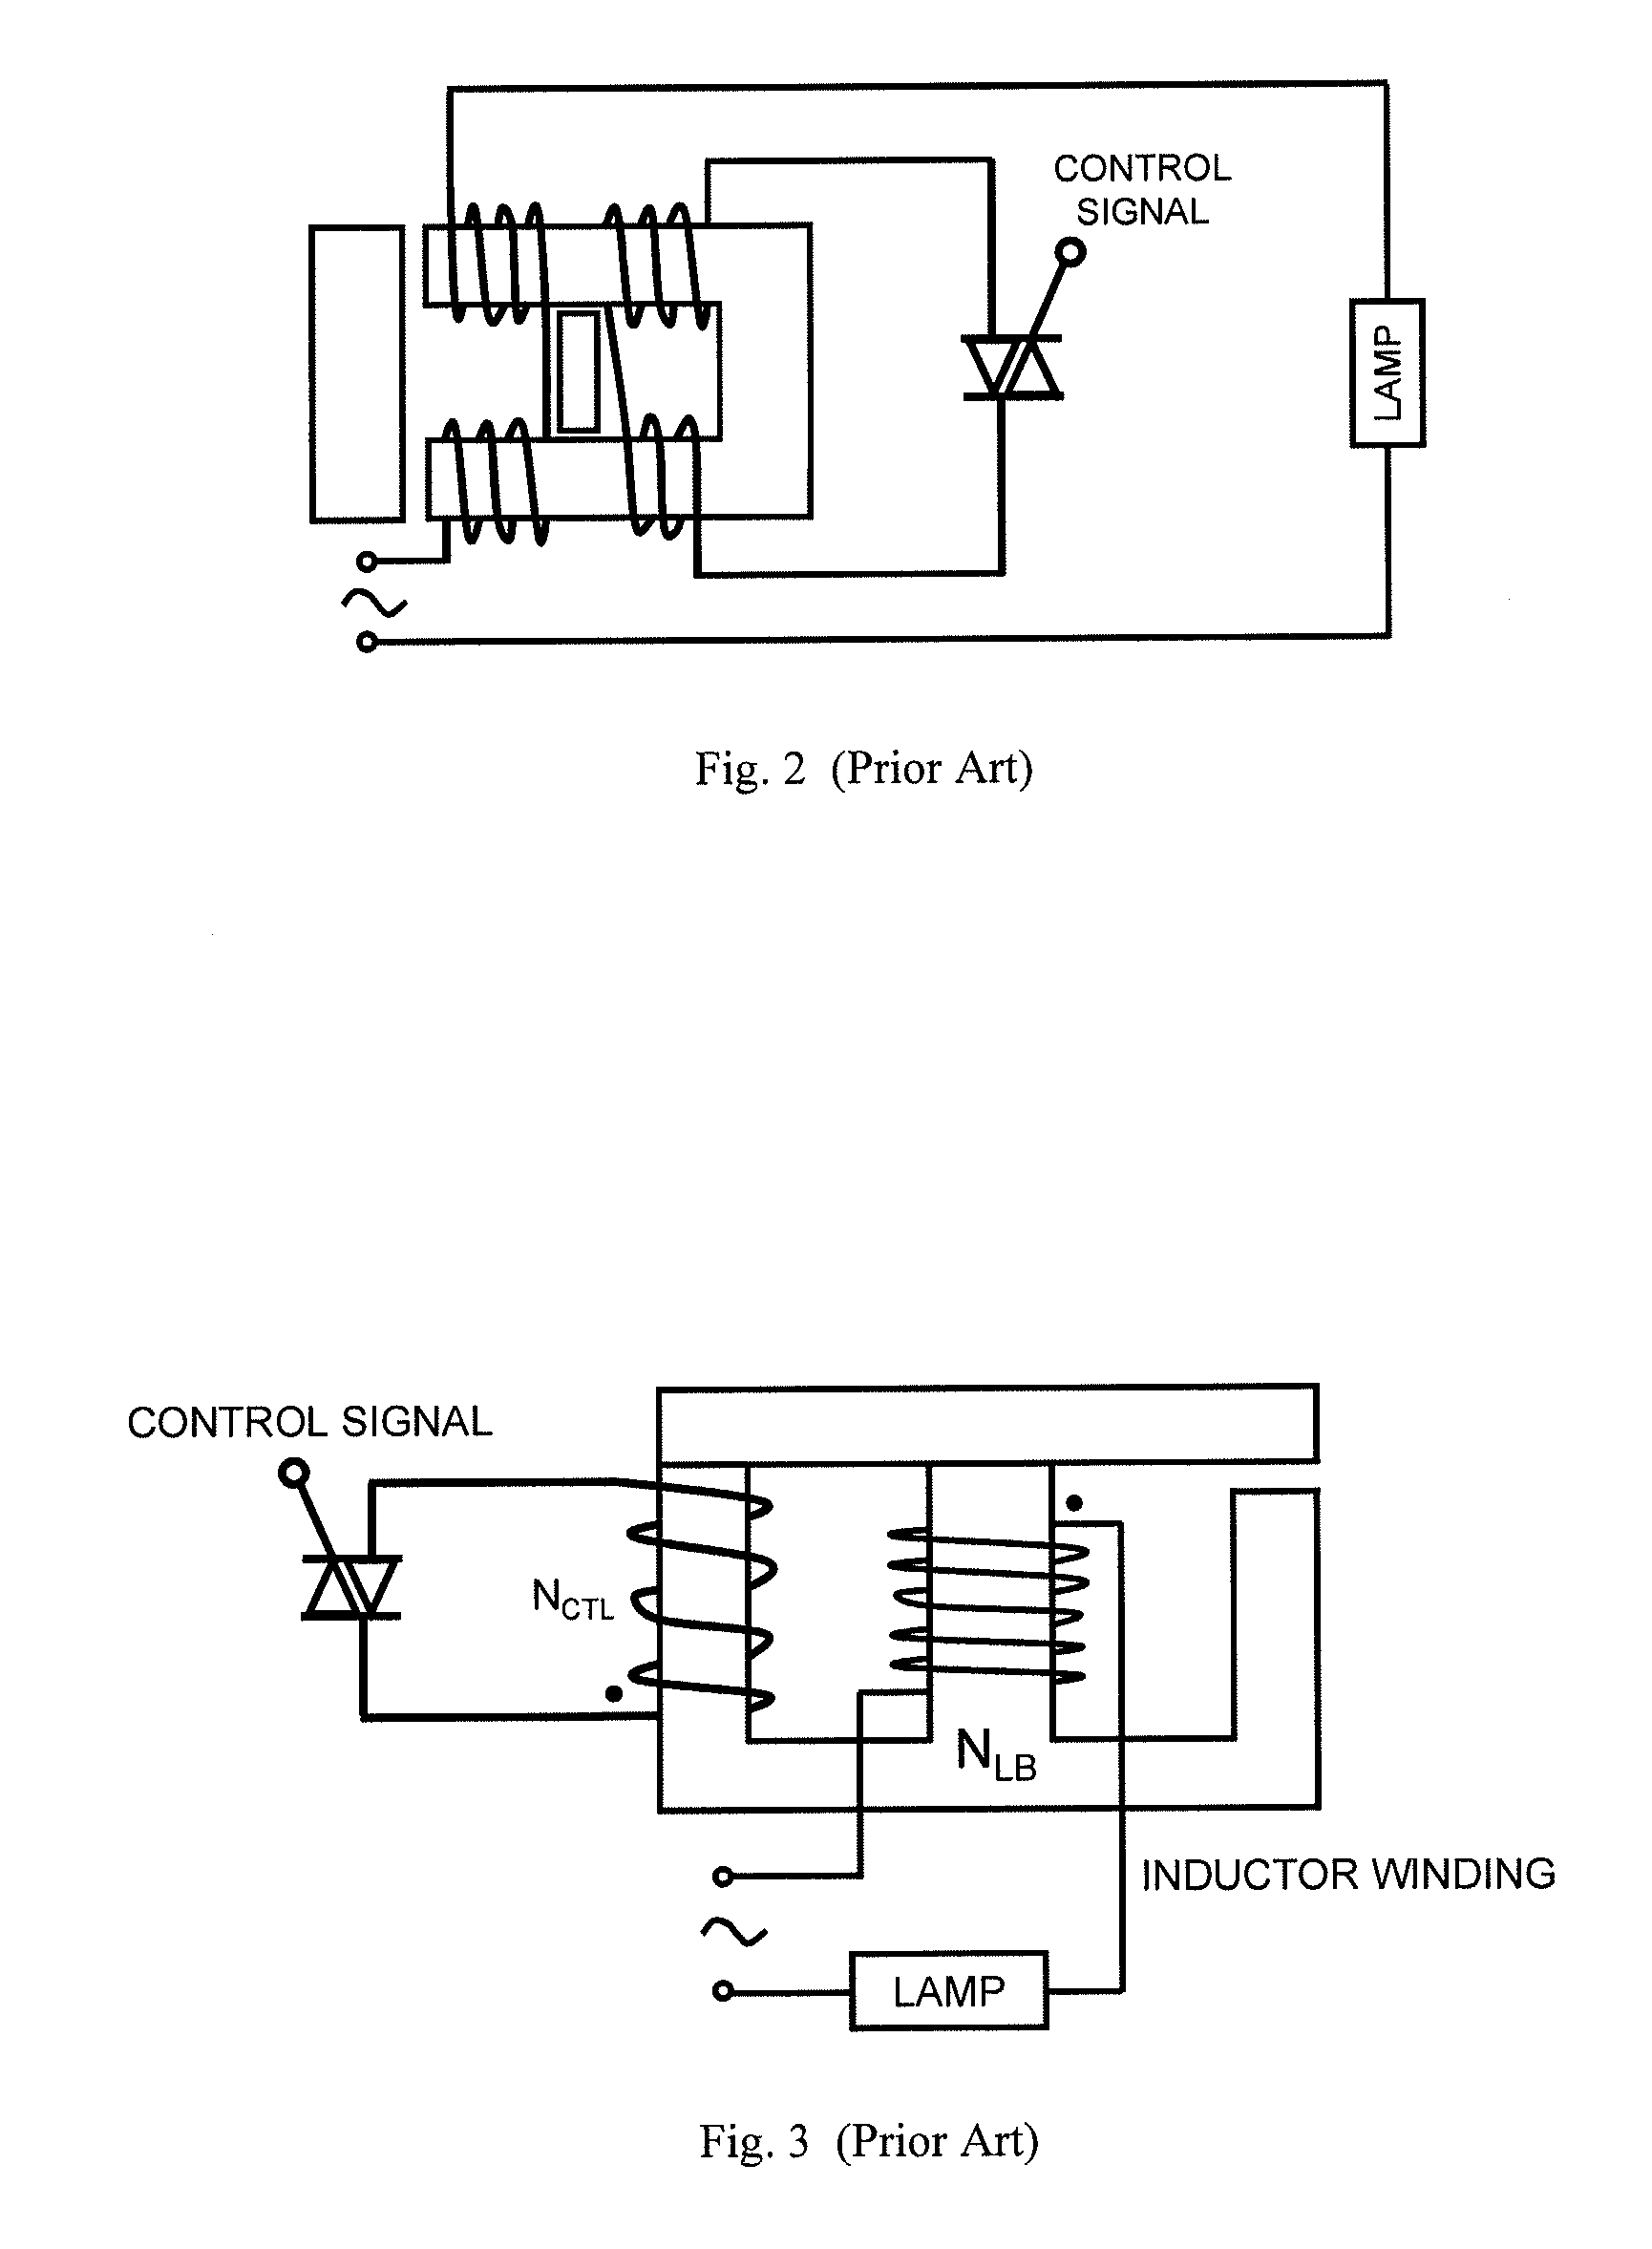 Current-controlled variable inductor